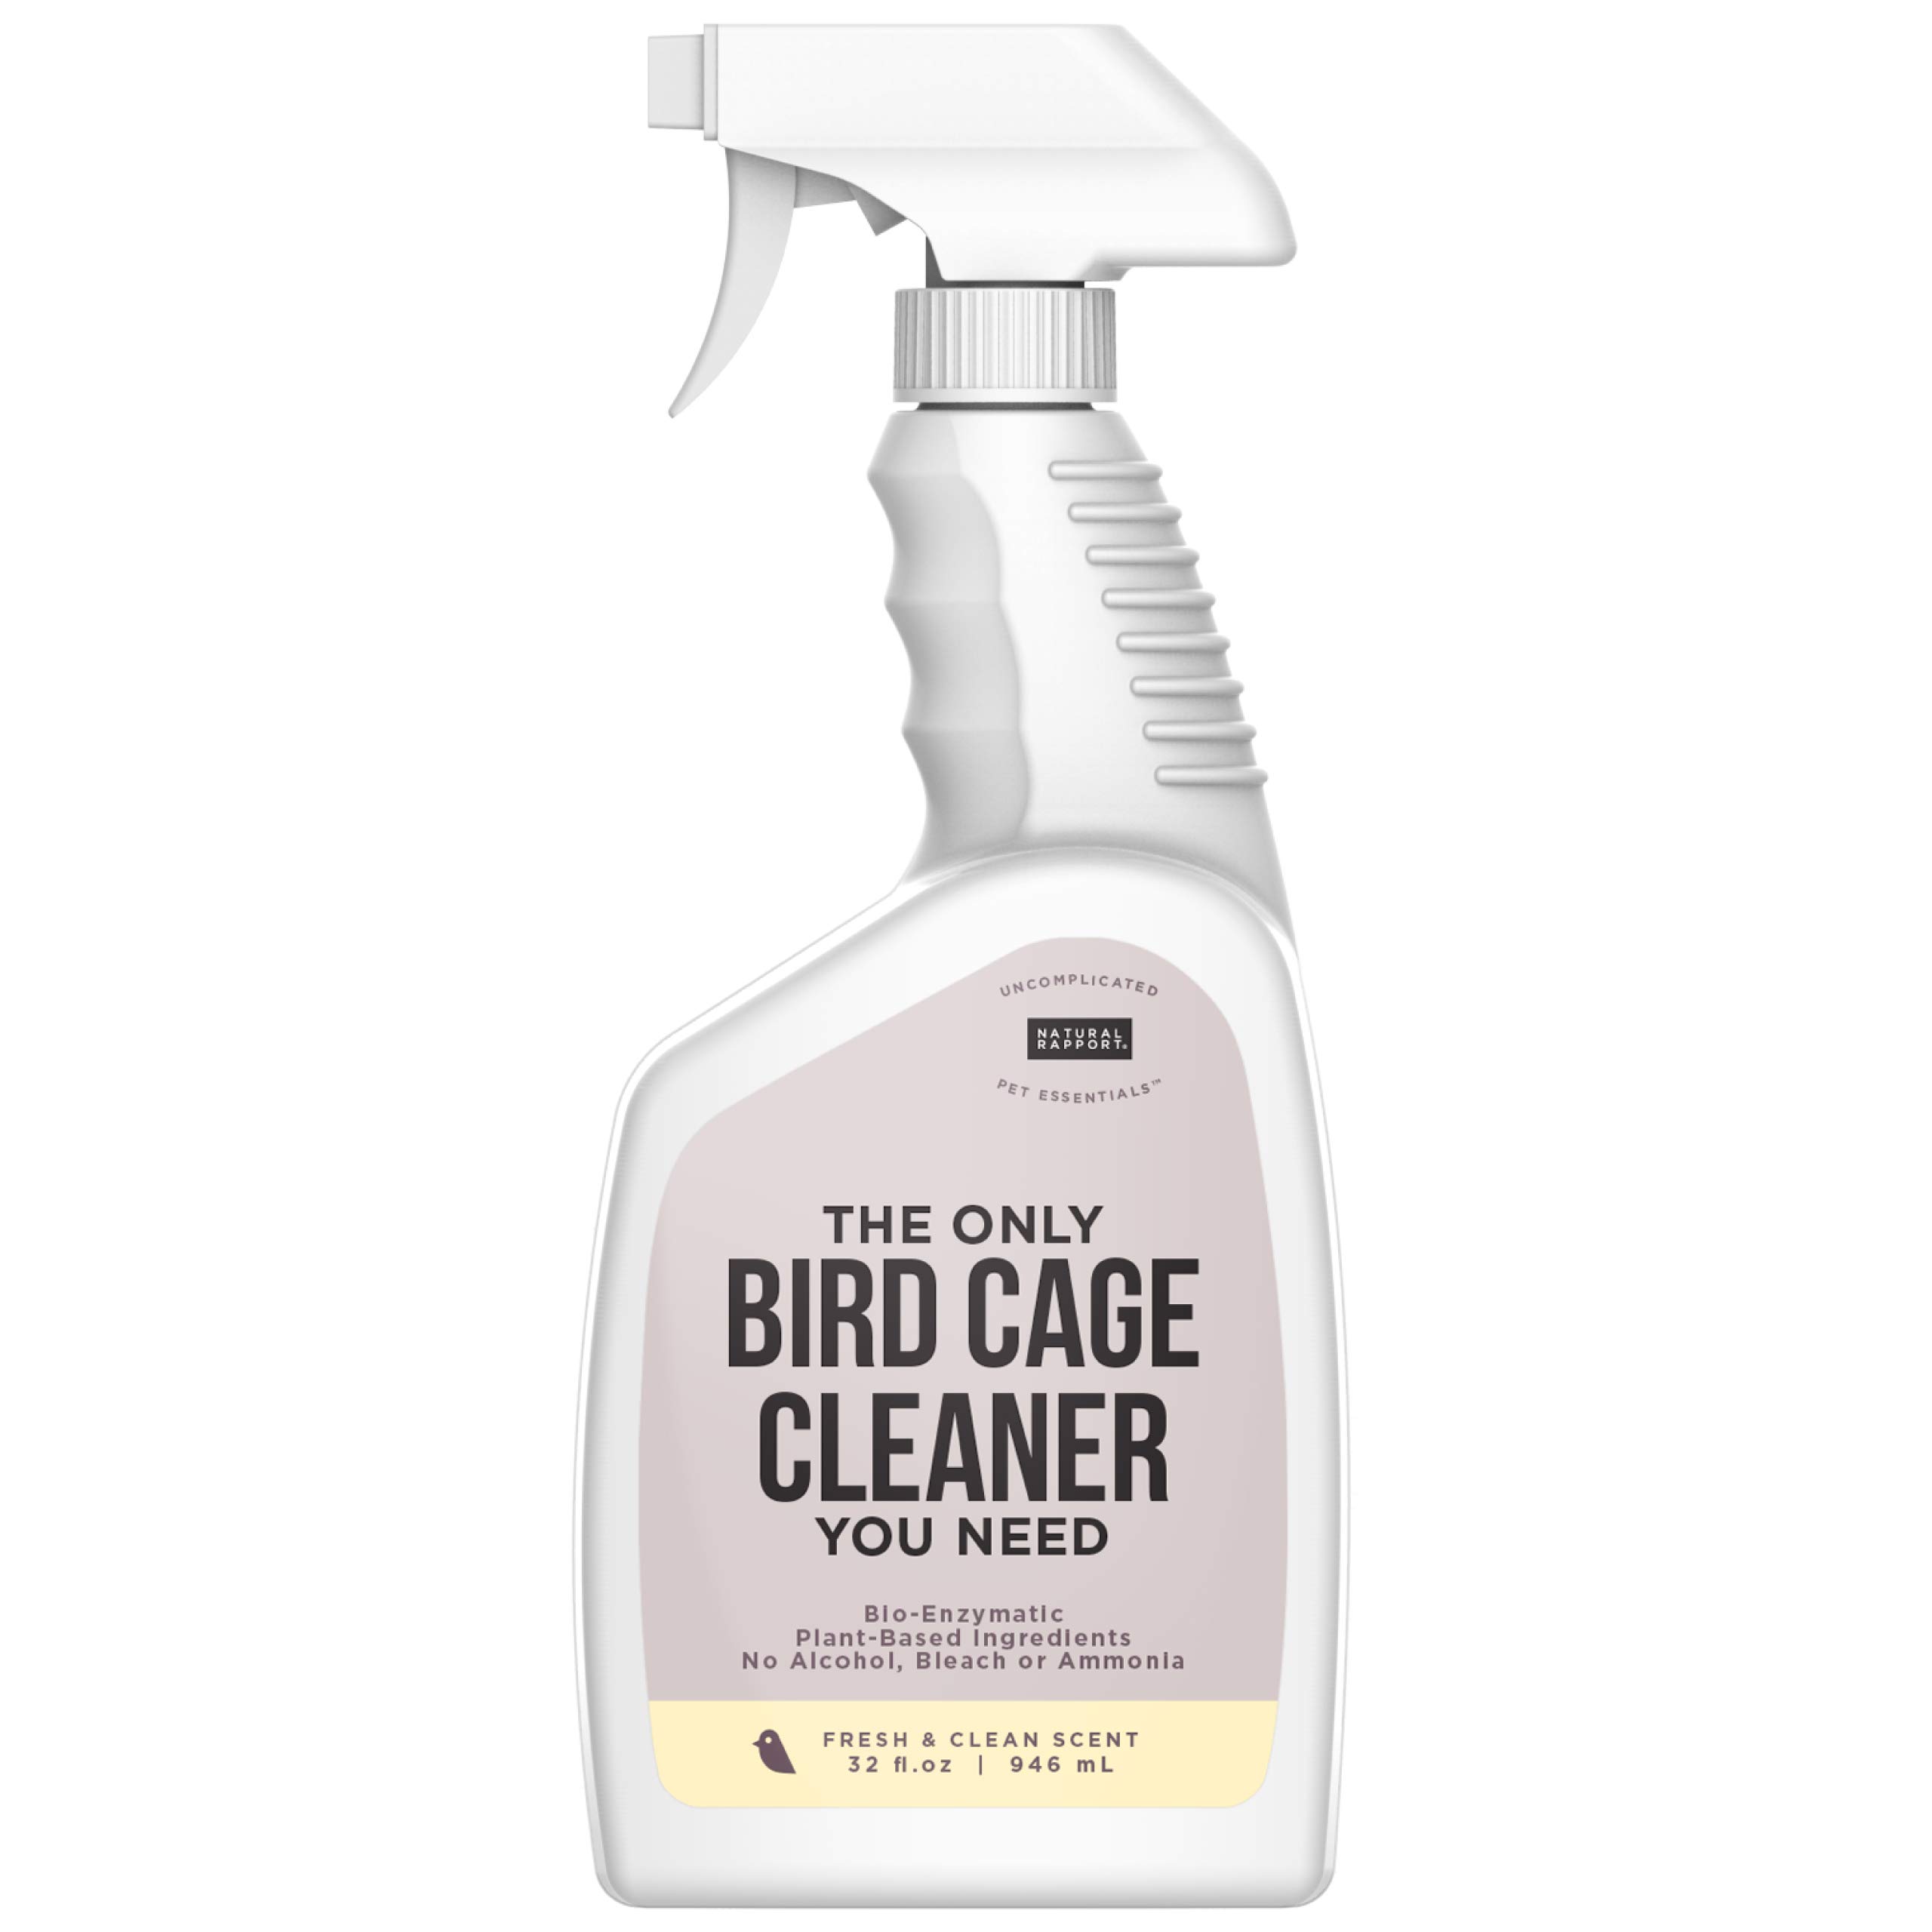 Natural Rapport Bird Cage Cleaner - The Only Bird Cage Cleaner You